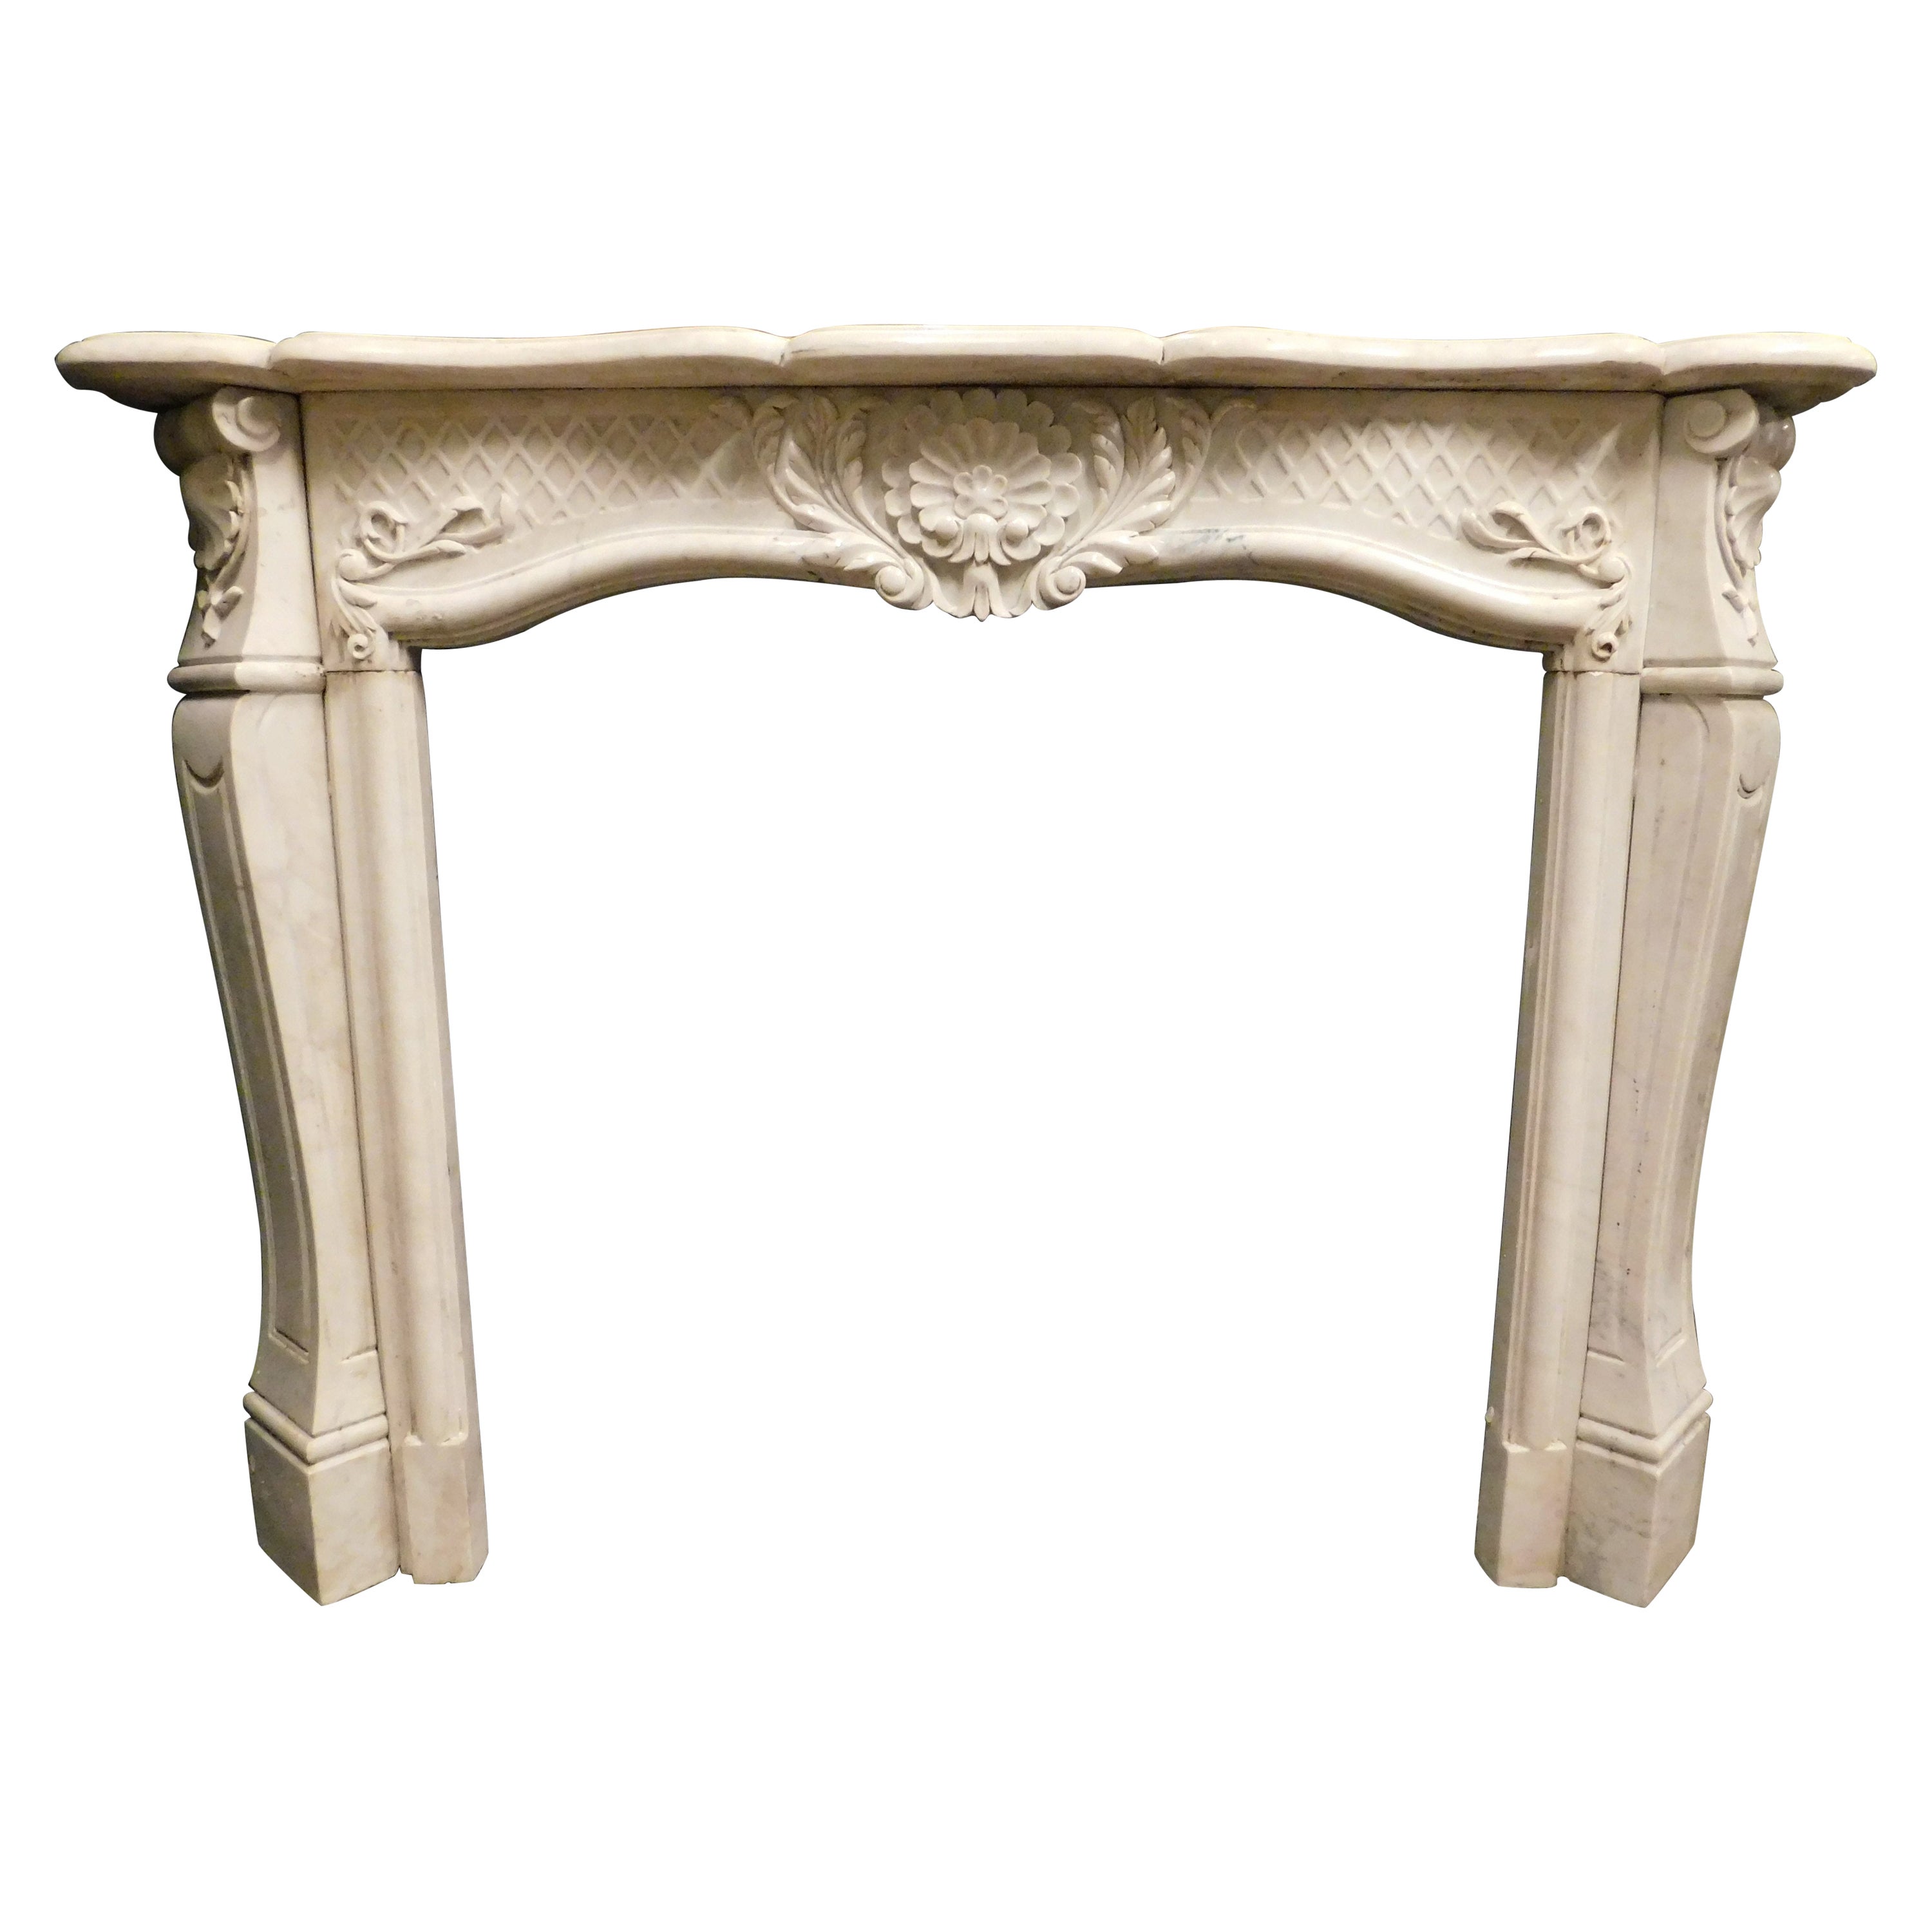 Fireplace mantle in white Carrara marble, carved with floral decorations, Italy